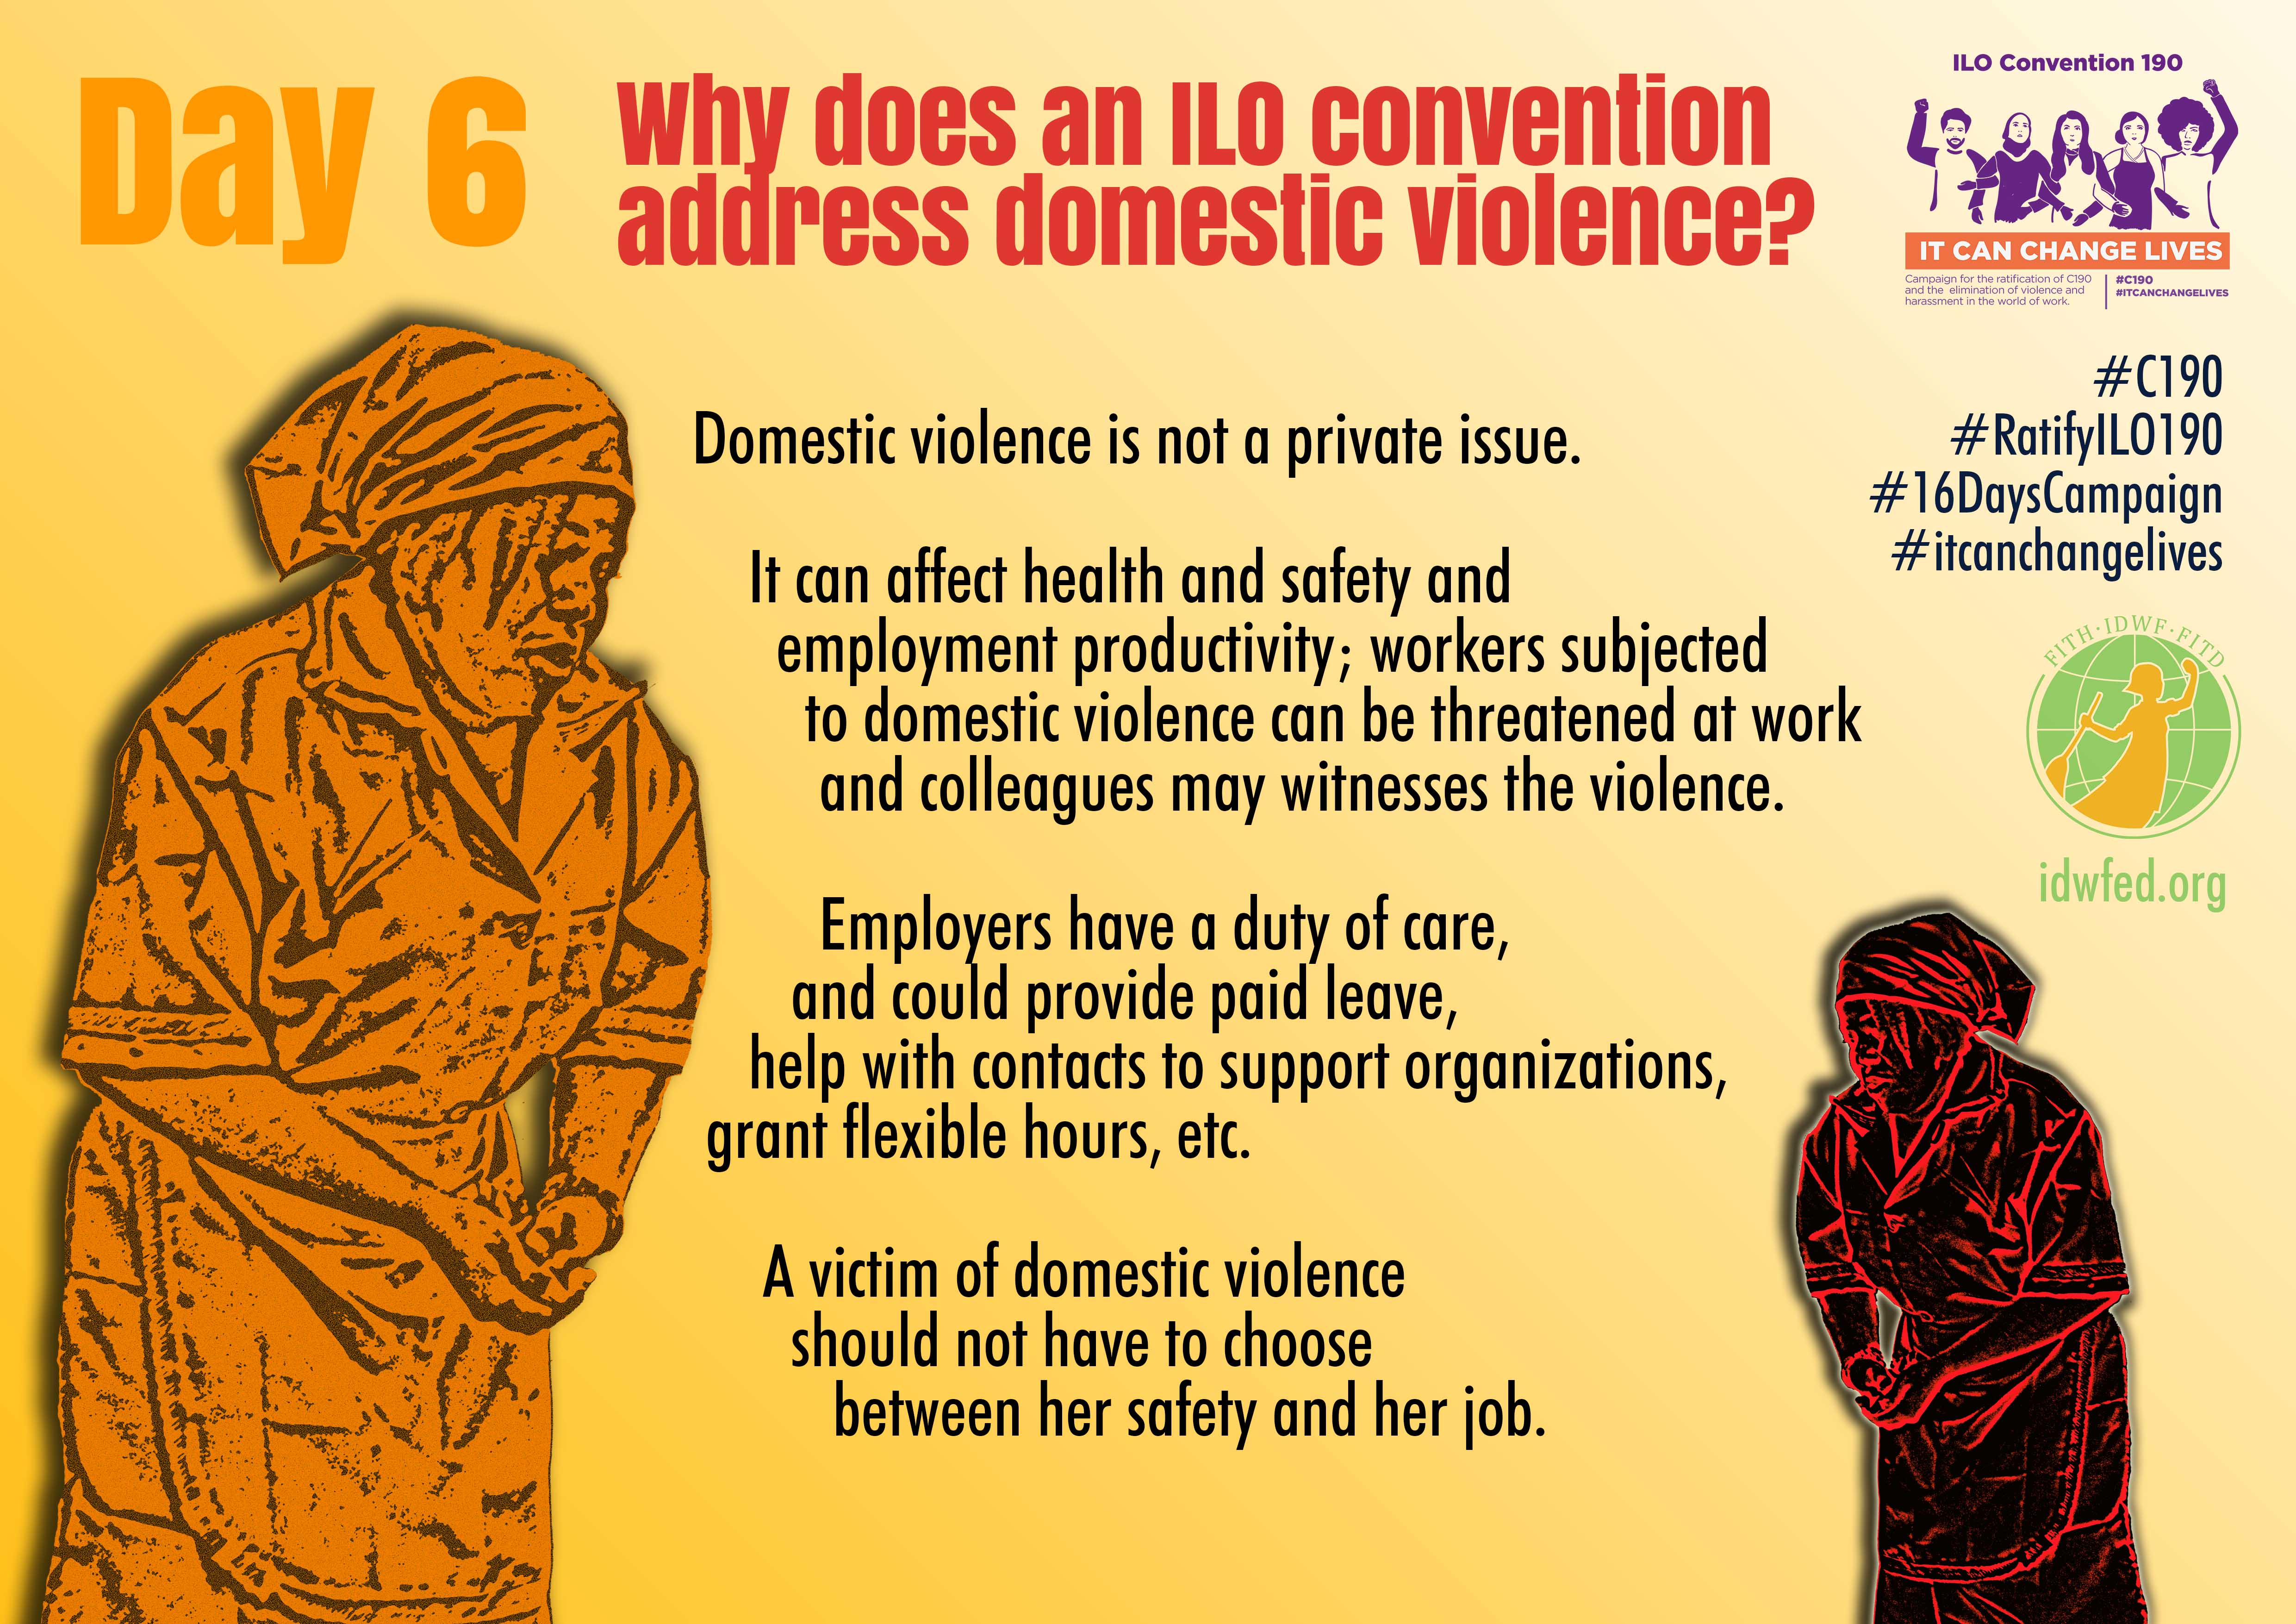 6. Why does an ILO convention address domestic violence?